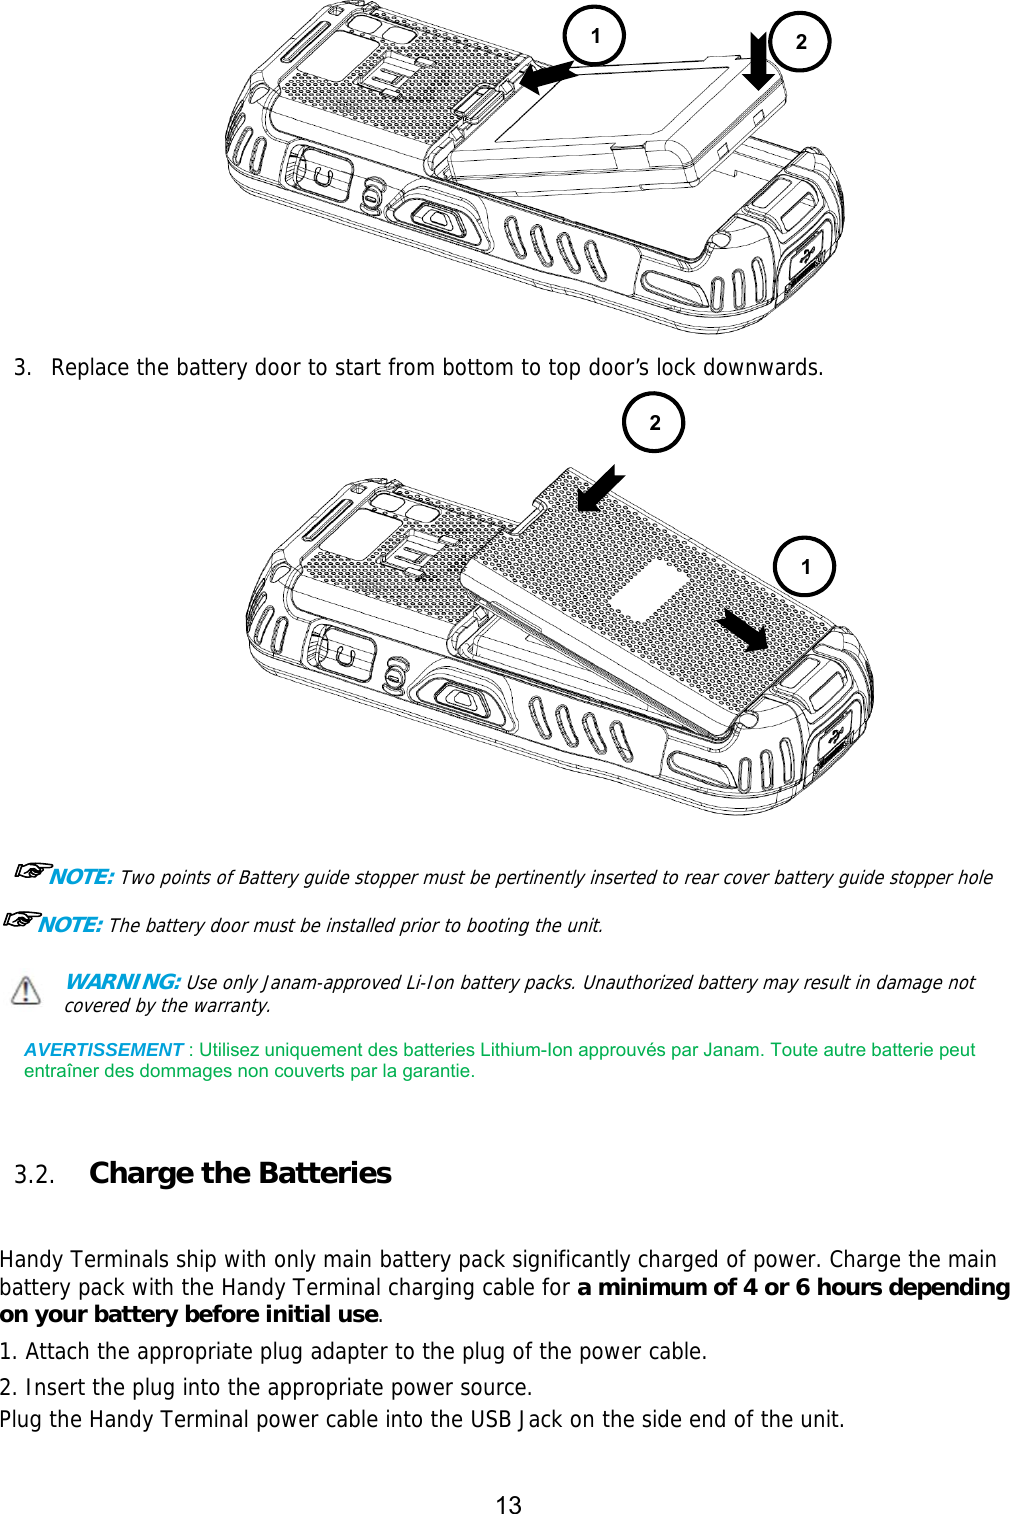 13   3. Replace the battery door to start from bottom to top door’s lock downwards.     ☞NOTE: Two points of Battery guide stopper must be pertinently inserted to rear cover battery guide stopper hole    ☞NOTE: The battery door must be installed prior to booting the unit. WARNING: Use only Janam-approved Li-Ion battery packs. Unauthorized battery may result in damage not covered by the warranty.  AVERTISSEMENT : Utilisez uniquement des batteries Lithium-Ion approuvés par Janam. Toute autre batterie peut entraîner des dommages non couverts par la garantie.    3.2. Charge the Batteries     Handy Terminals ship with only main battery pack significantly charged of power. Charge the main battery pack with the Handy Terminal charging cable for a minimum of 4 or 6 hours depending on your battery before initial use.  1. Attach the appropriate plug adapter to the plug of the power cable.  2. Insert the plug into the appropriate power source. Plug the Handy Terminal power cable into the USB Jack on the side end of the unit.  12 1 2